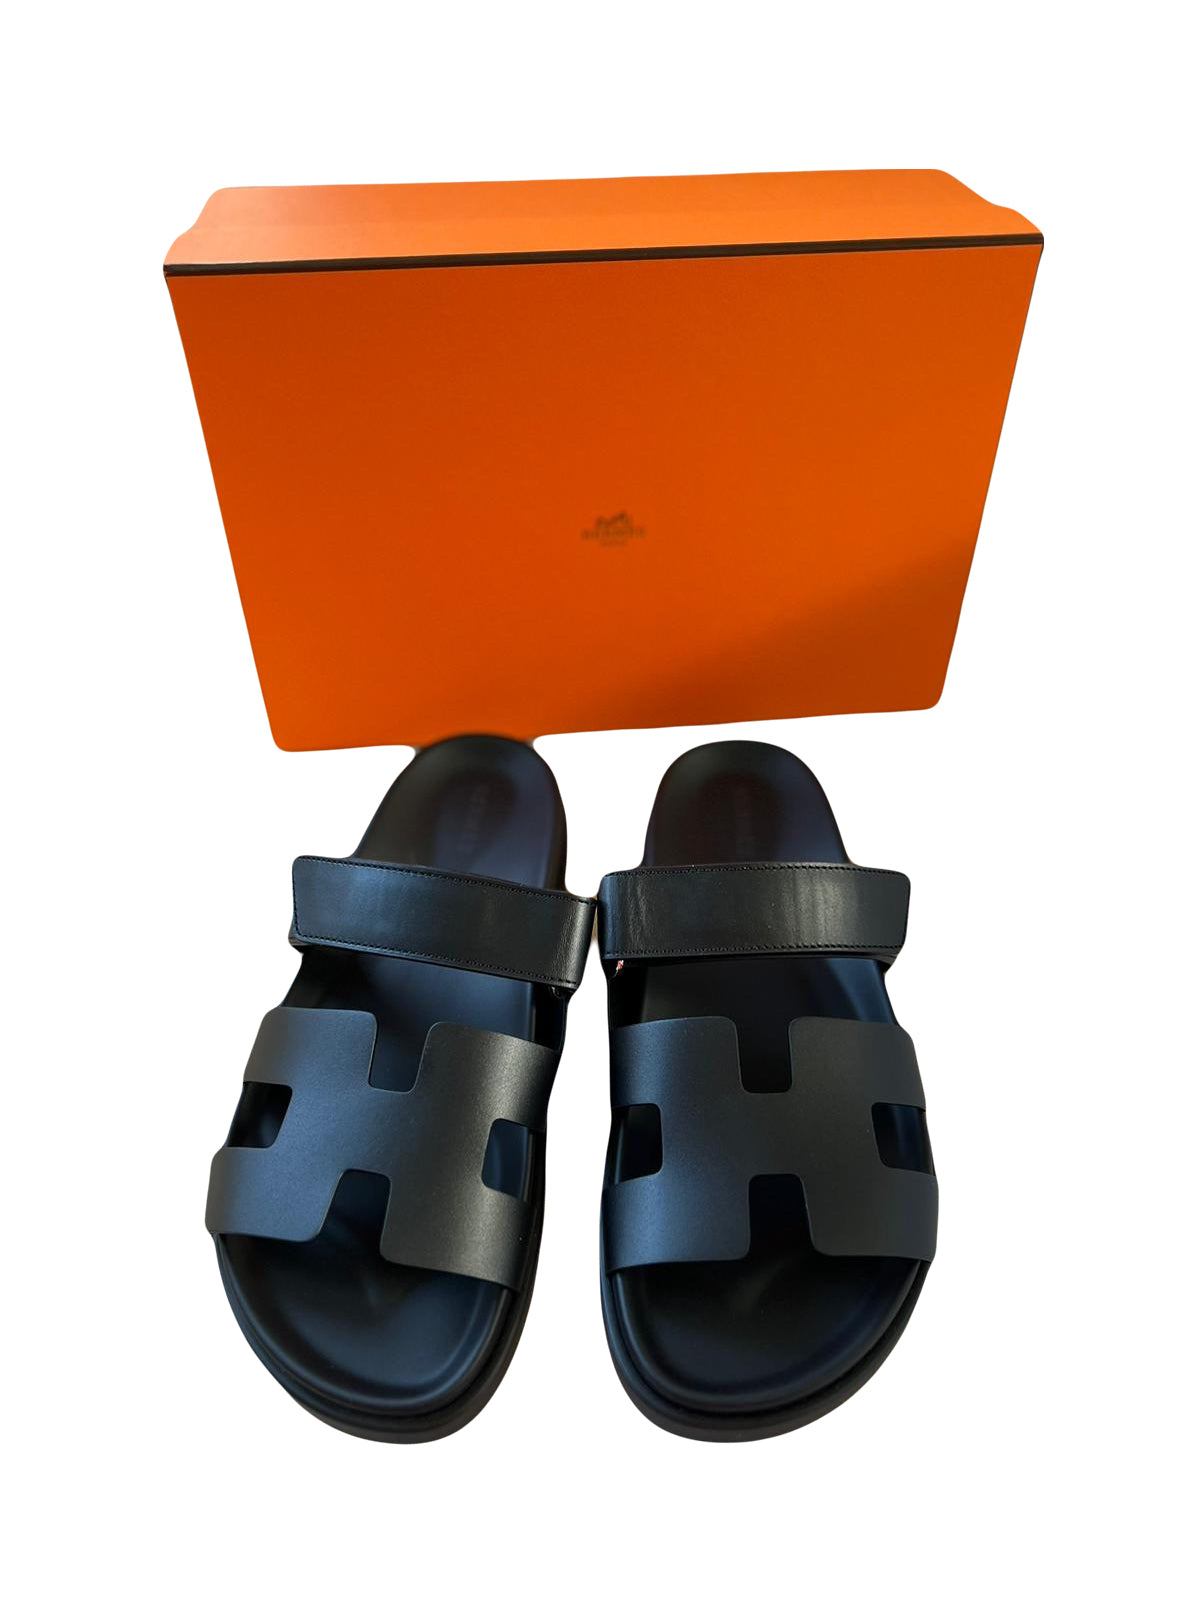 HERMES Chypre Calf leather sandals size 39 *Store Fresh*